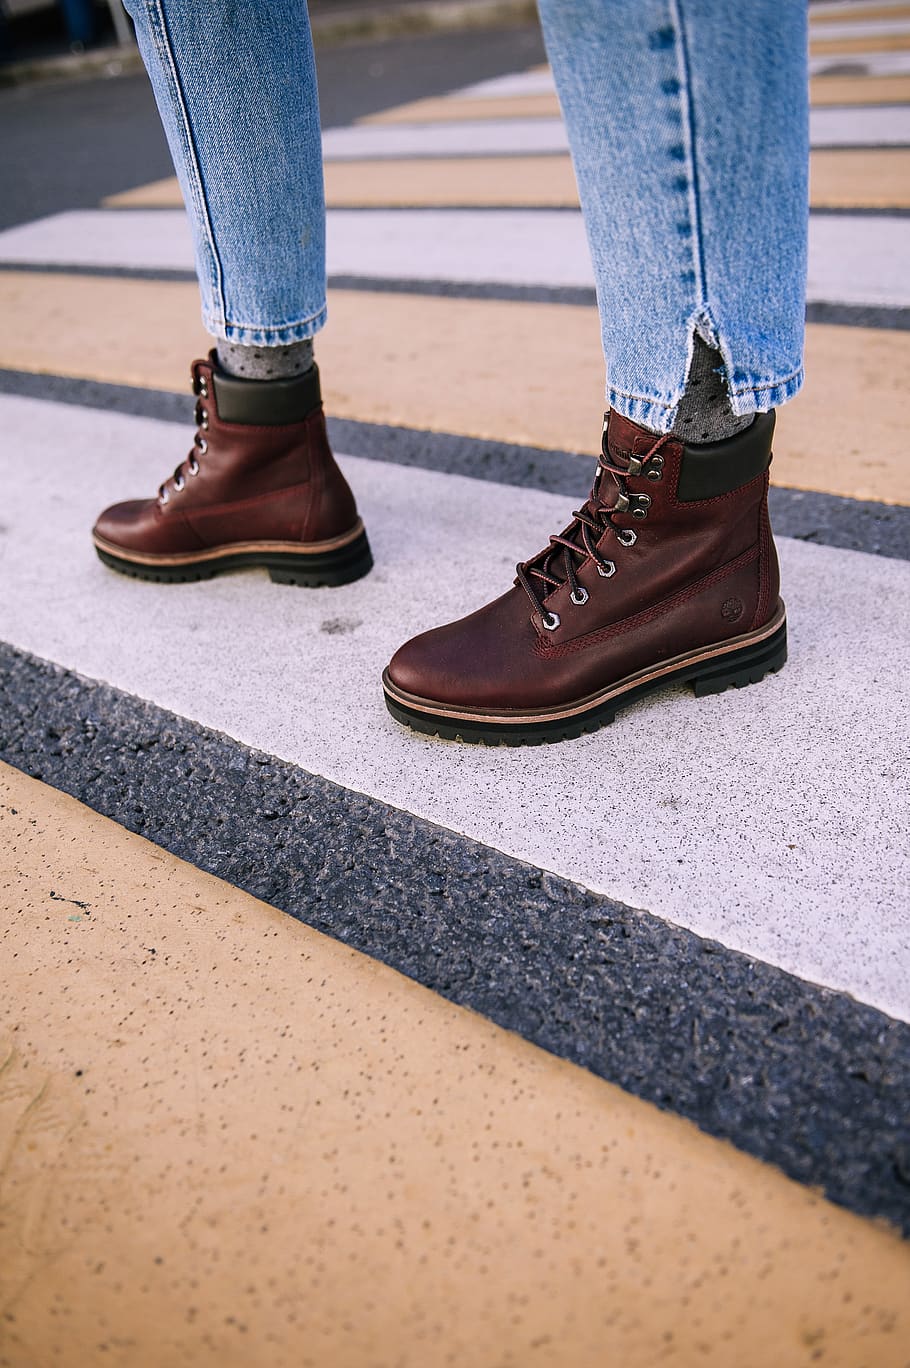 person wearing pair of brown leather boots, footwear, apparel